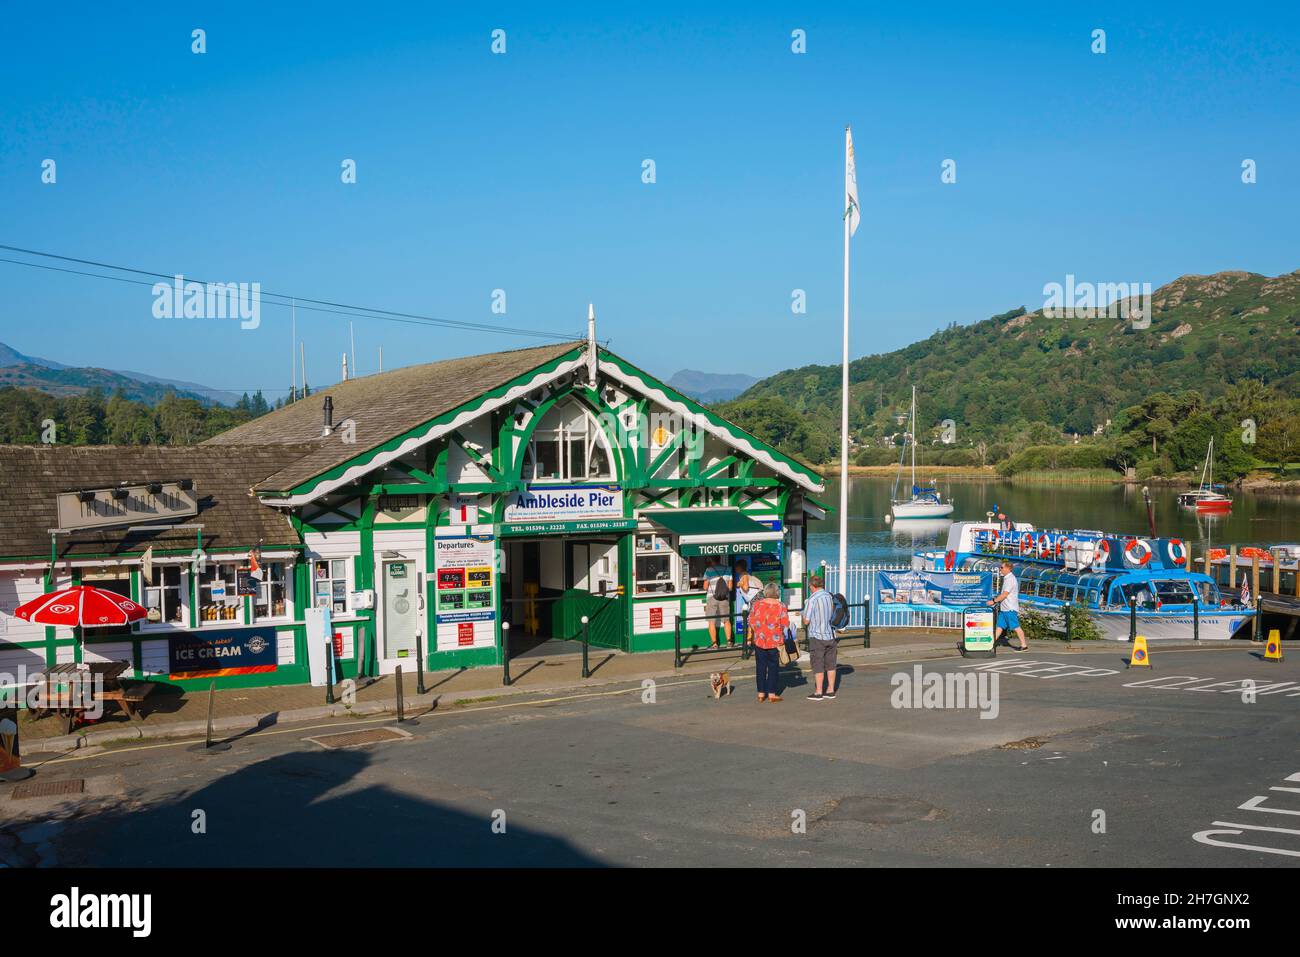 Ambleside Pier, view in summer of Ambleside Pier, the main ticket office for water services at Waterhead at the north end of Lake Windermere, England Stock Photo